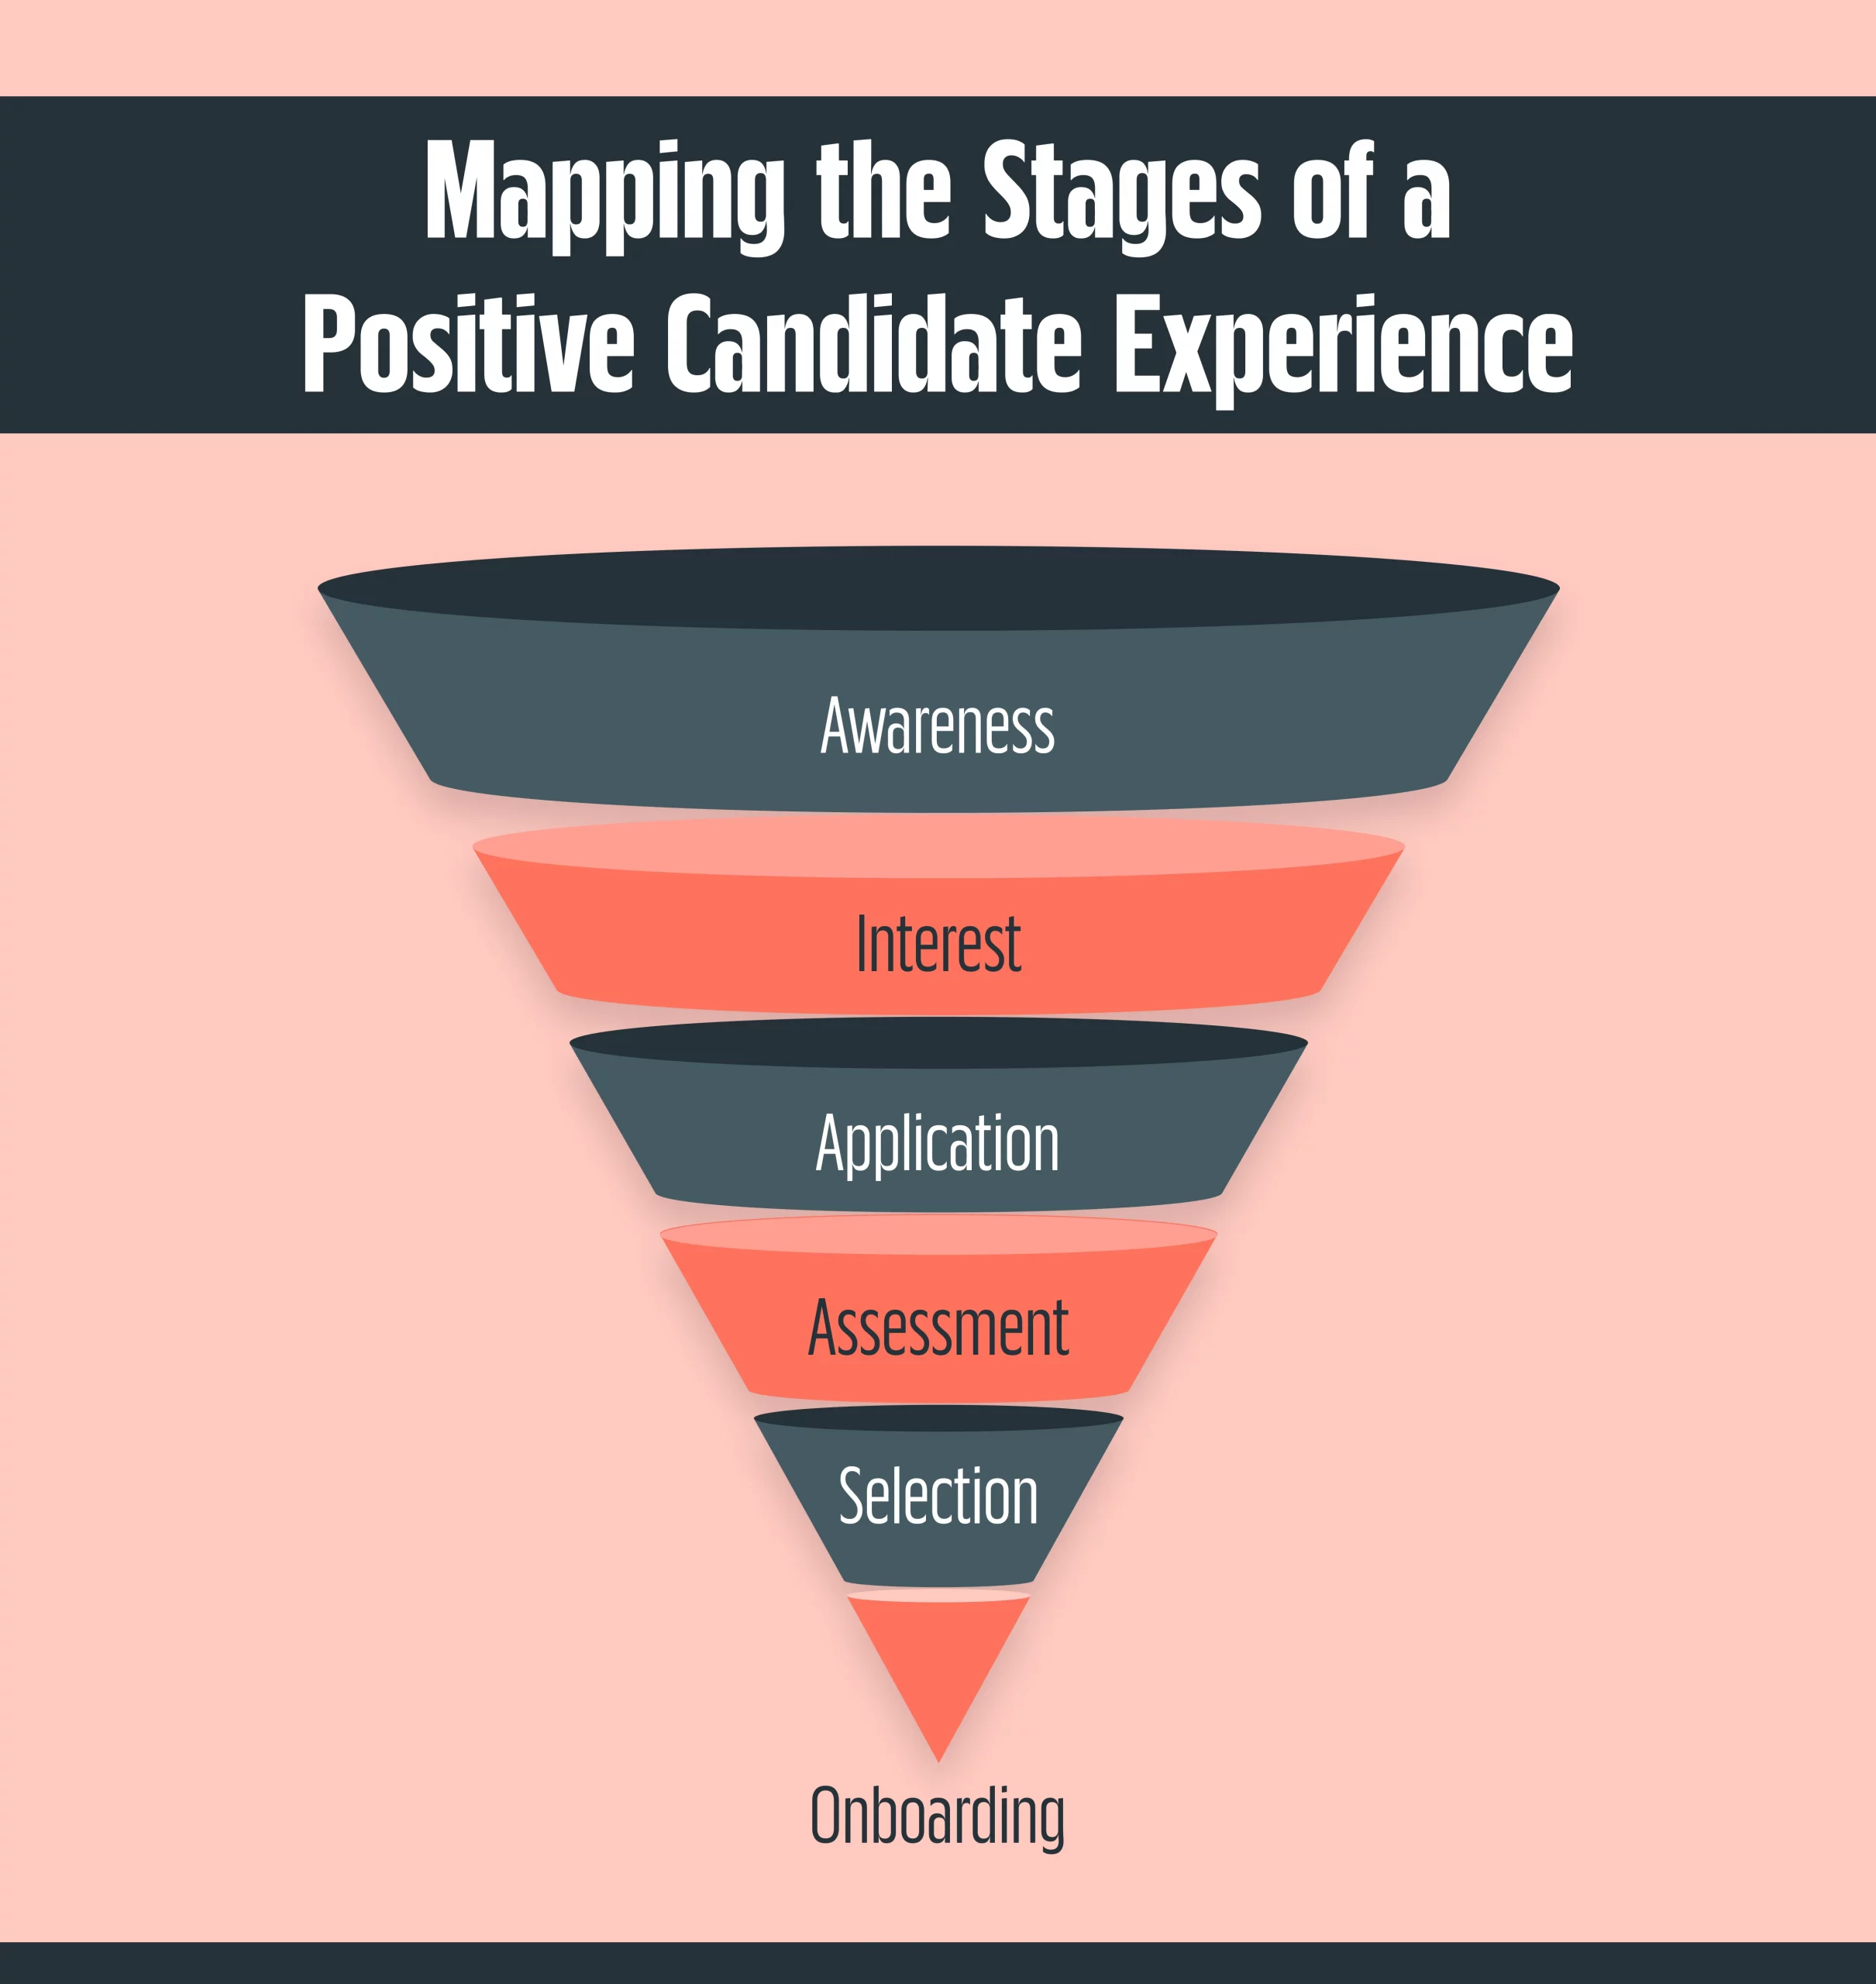 Mapping the Stages of a Positive Candidate Experience